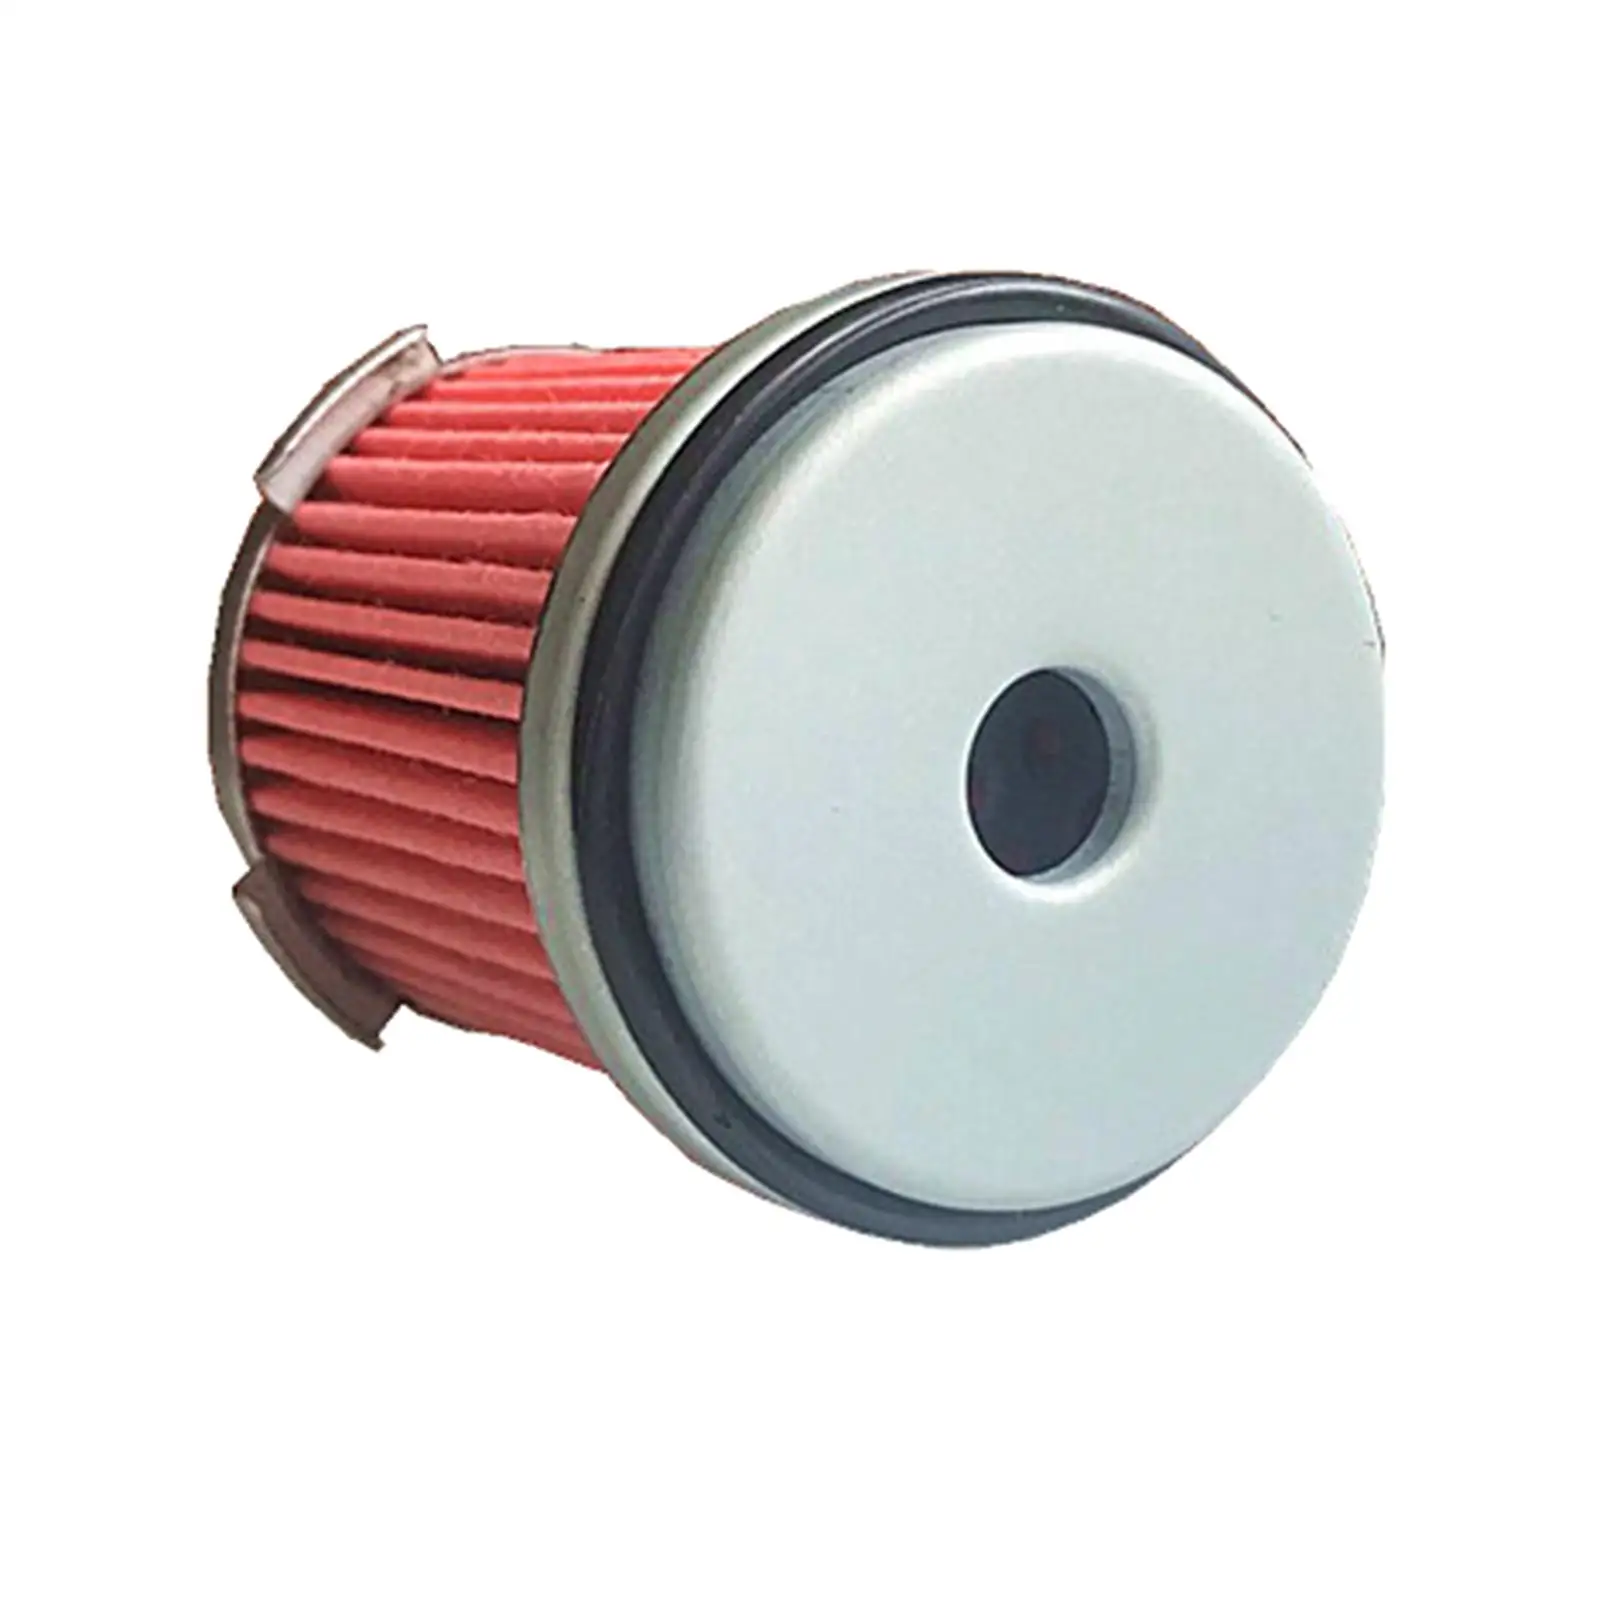 Auto Transmission Filter 25450-p4V-013 25450P4V013 Directly Replace High Performance High Quality for Acura MDX RDX Tsx TL